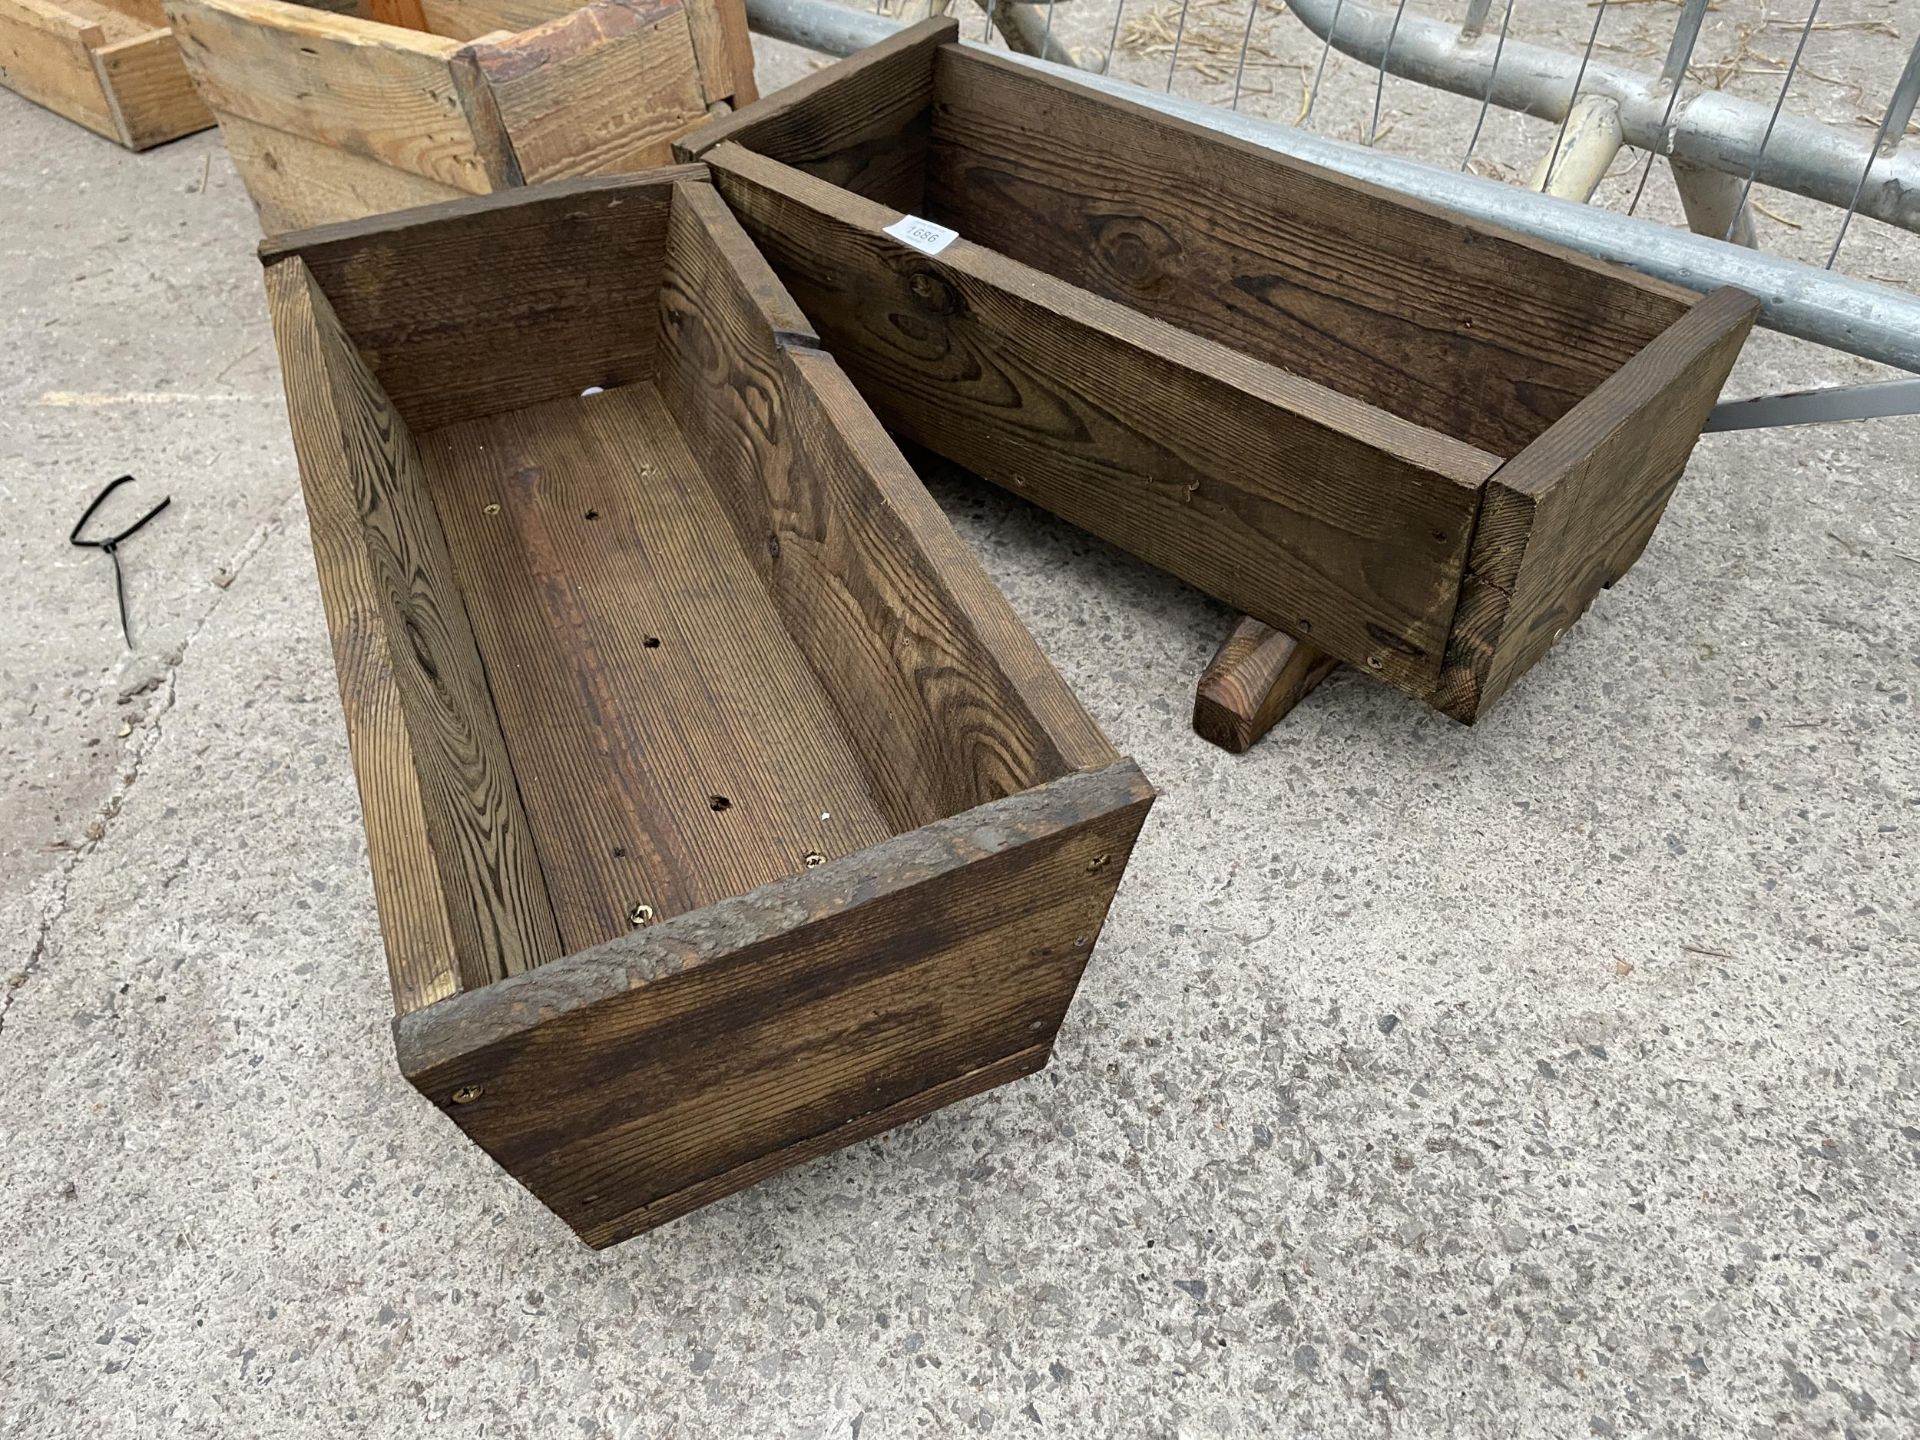 TWO SMALL WOODEN TROUGH PLANTERS